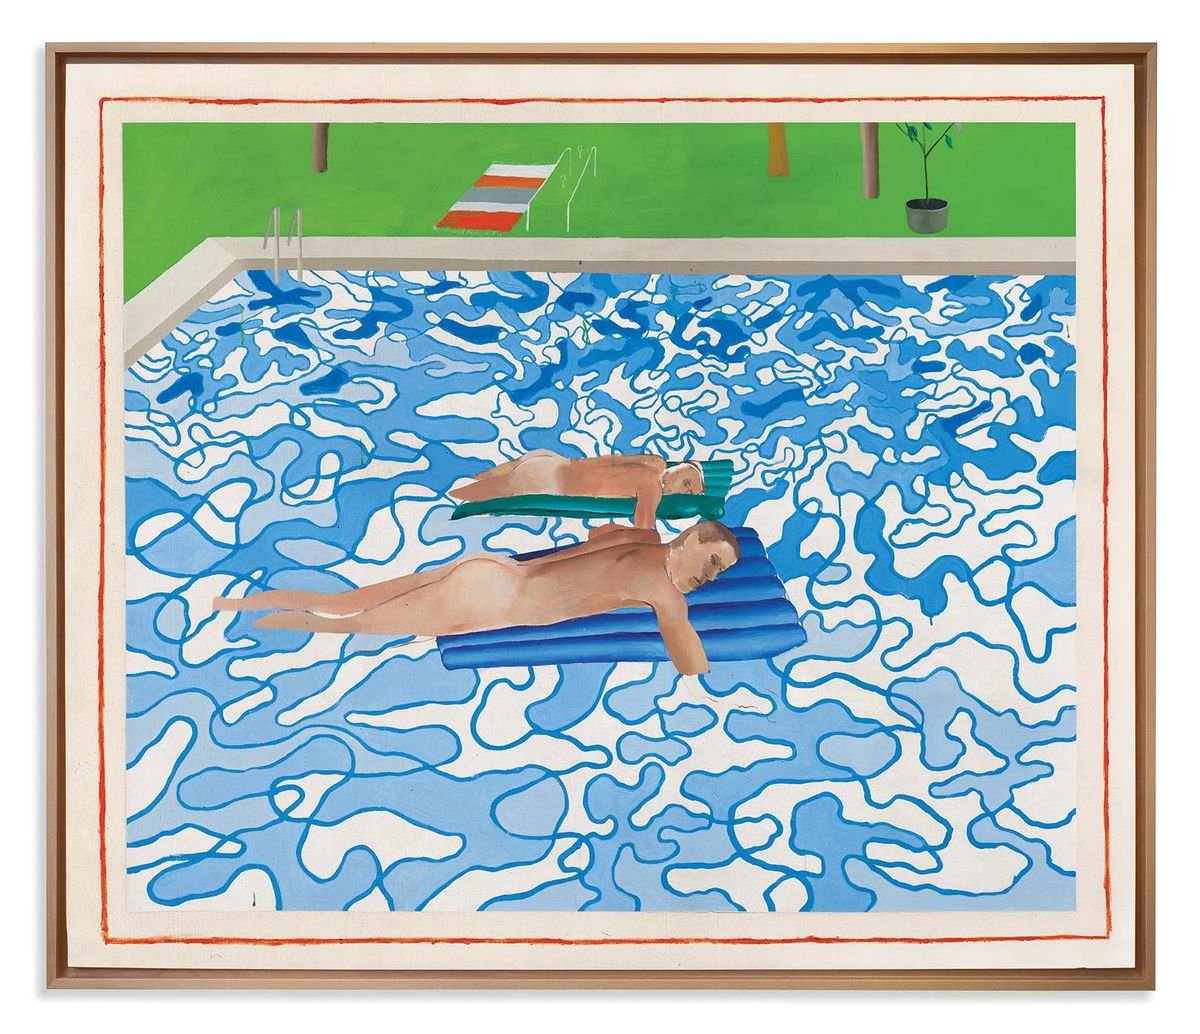 David Hockney’s California (1965), which is being offered by Christie’s, was last seen in public 40 years ago

Photo: Christie’s Images